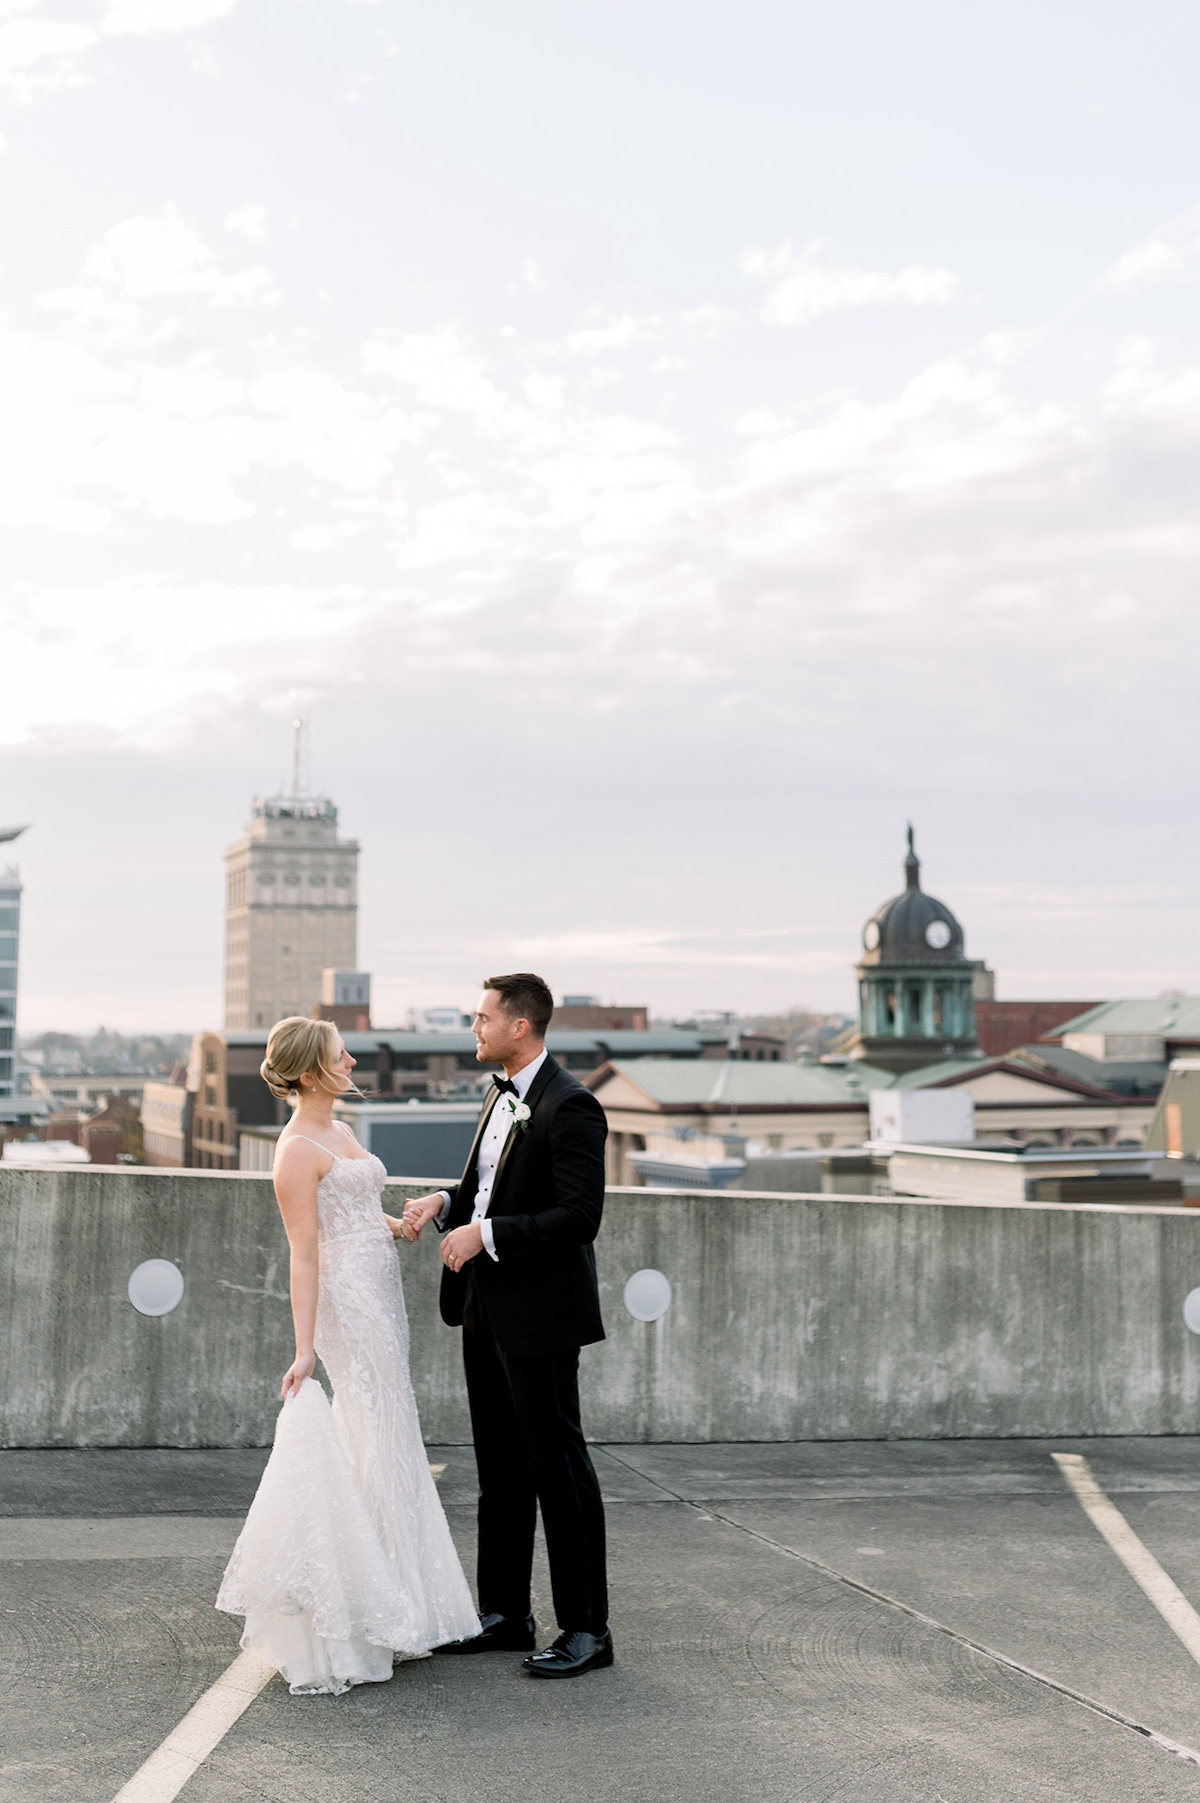 Continuation of the love story in Lancaster City, where the bride and groom showcase their high-end connection against the city's backdrop.